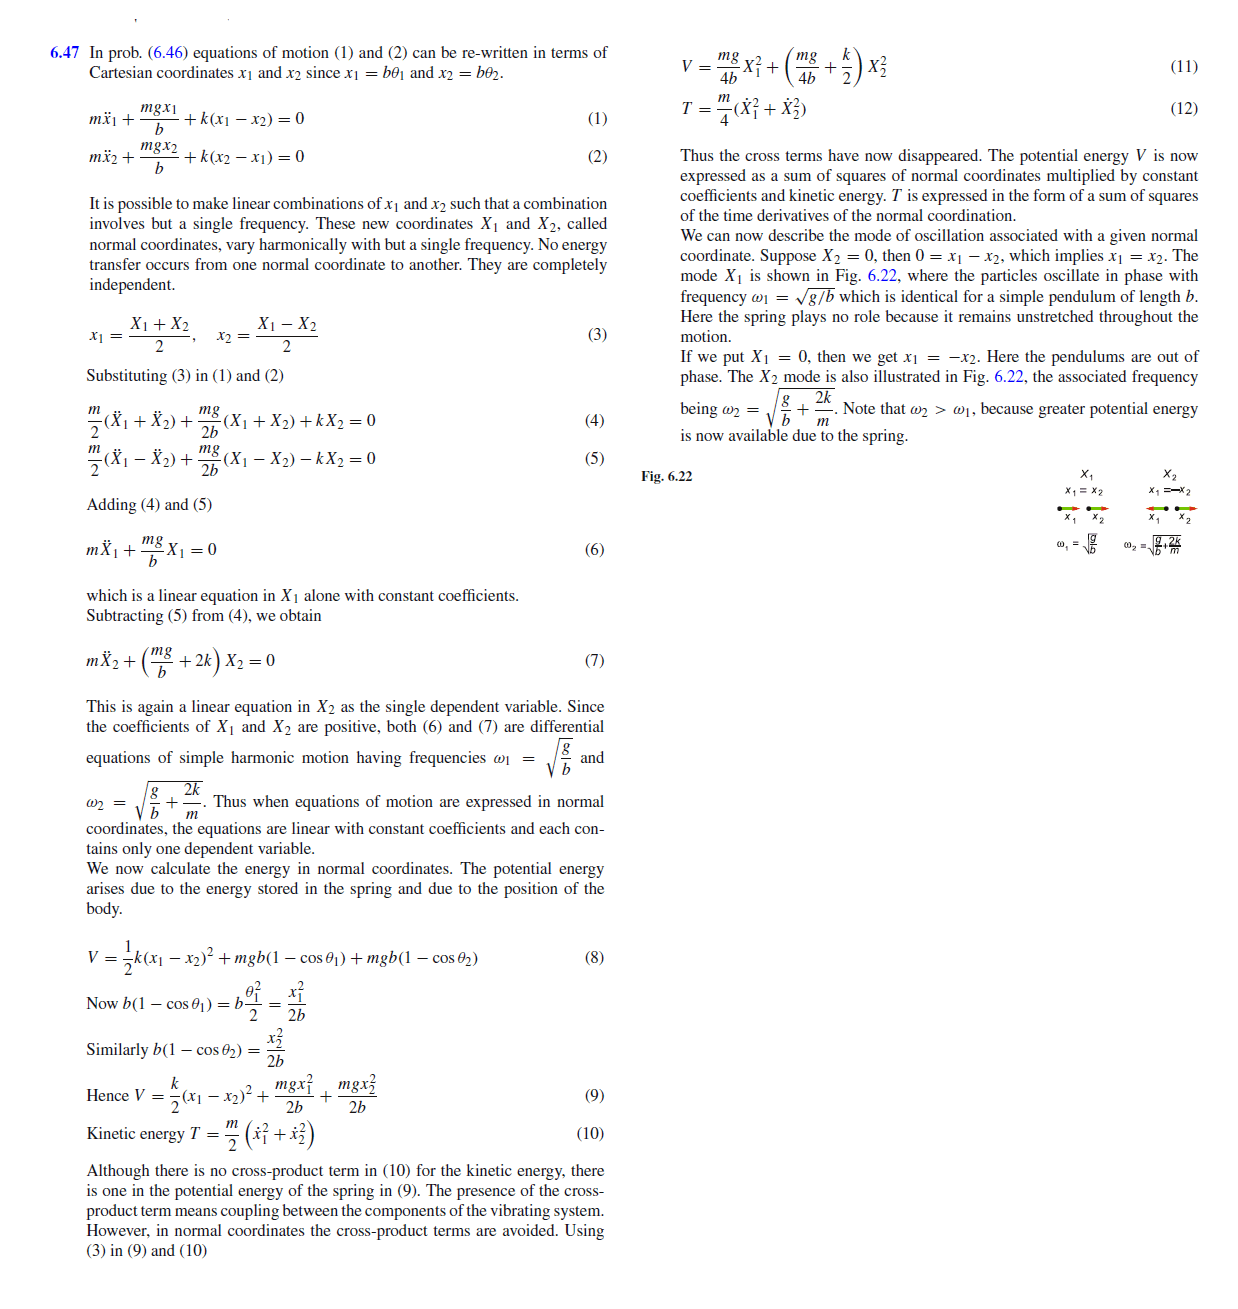 In prob. (6.46) express the equations of motion and the energy in terms of norma